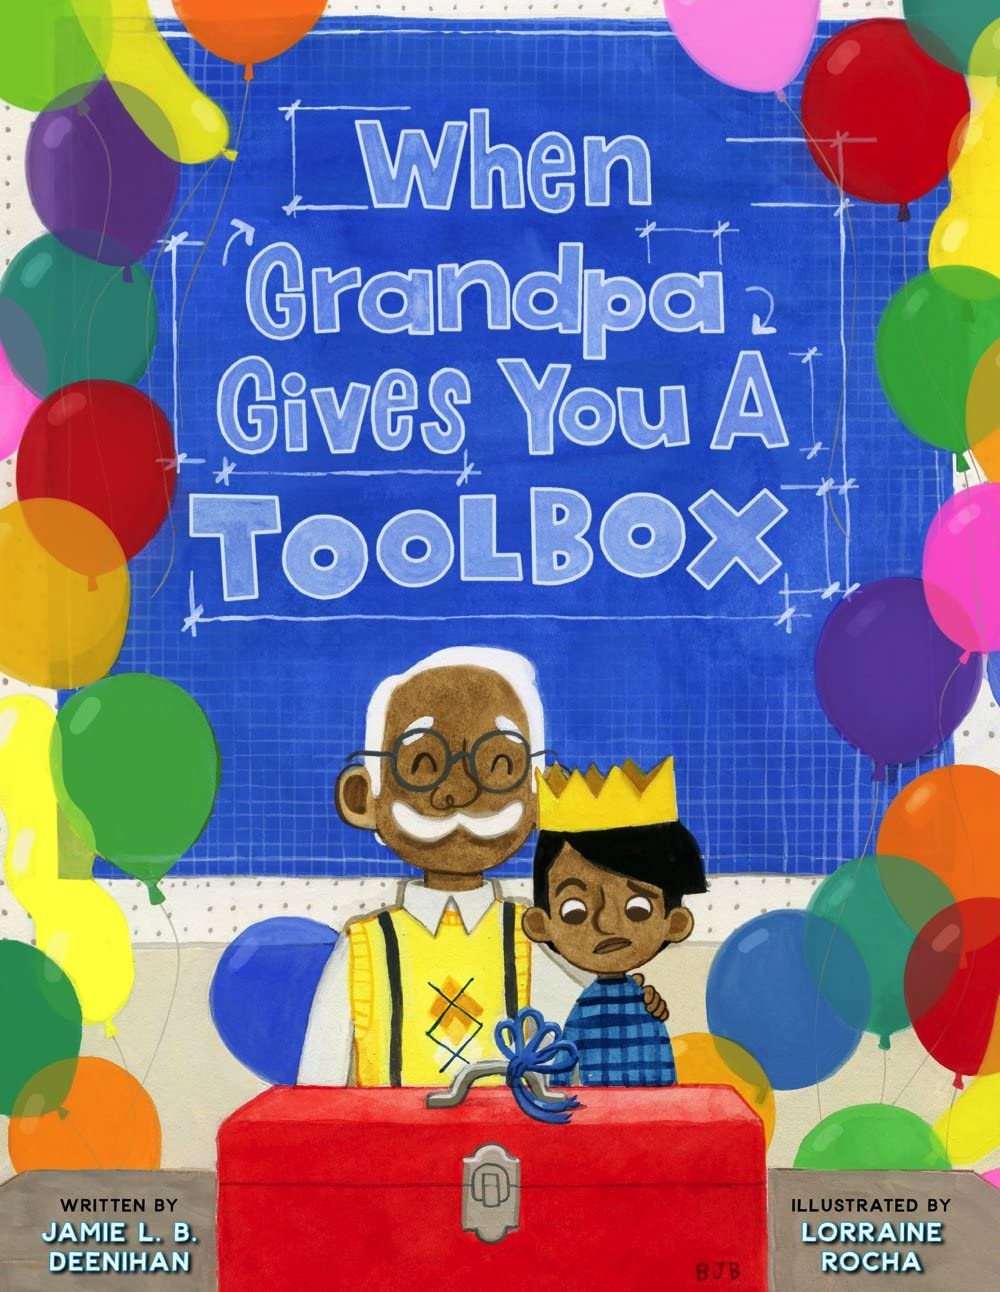 grandpa and child with tool box gift